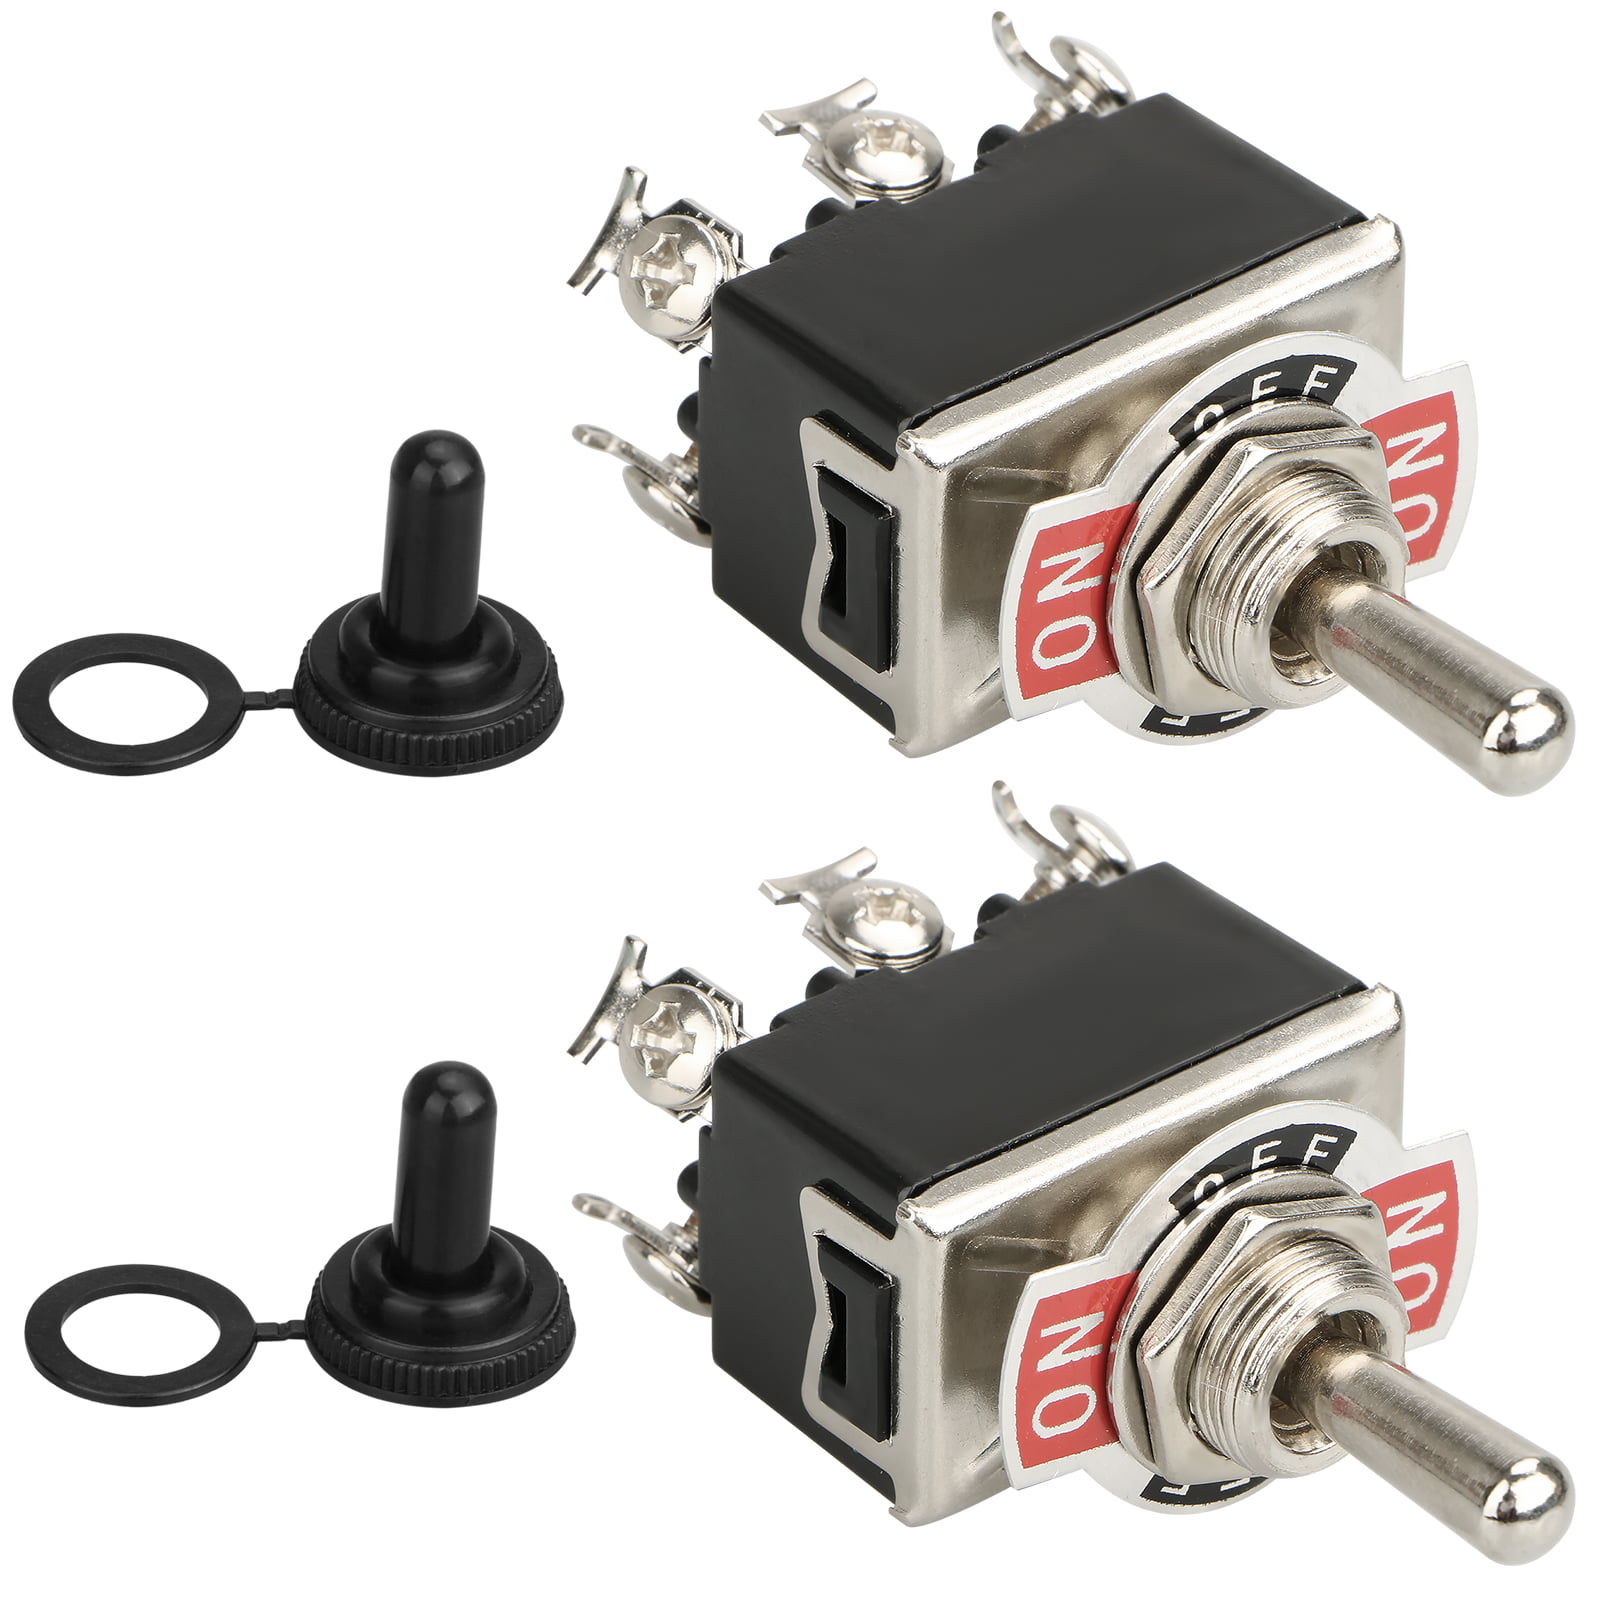 2pcs Waterproof 6pin Heavy Duty Boot Cap Dpdt Momentary Toggle Switch